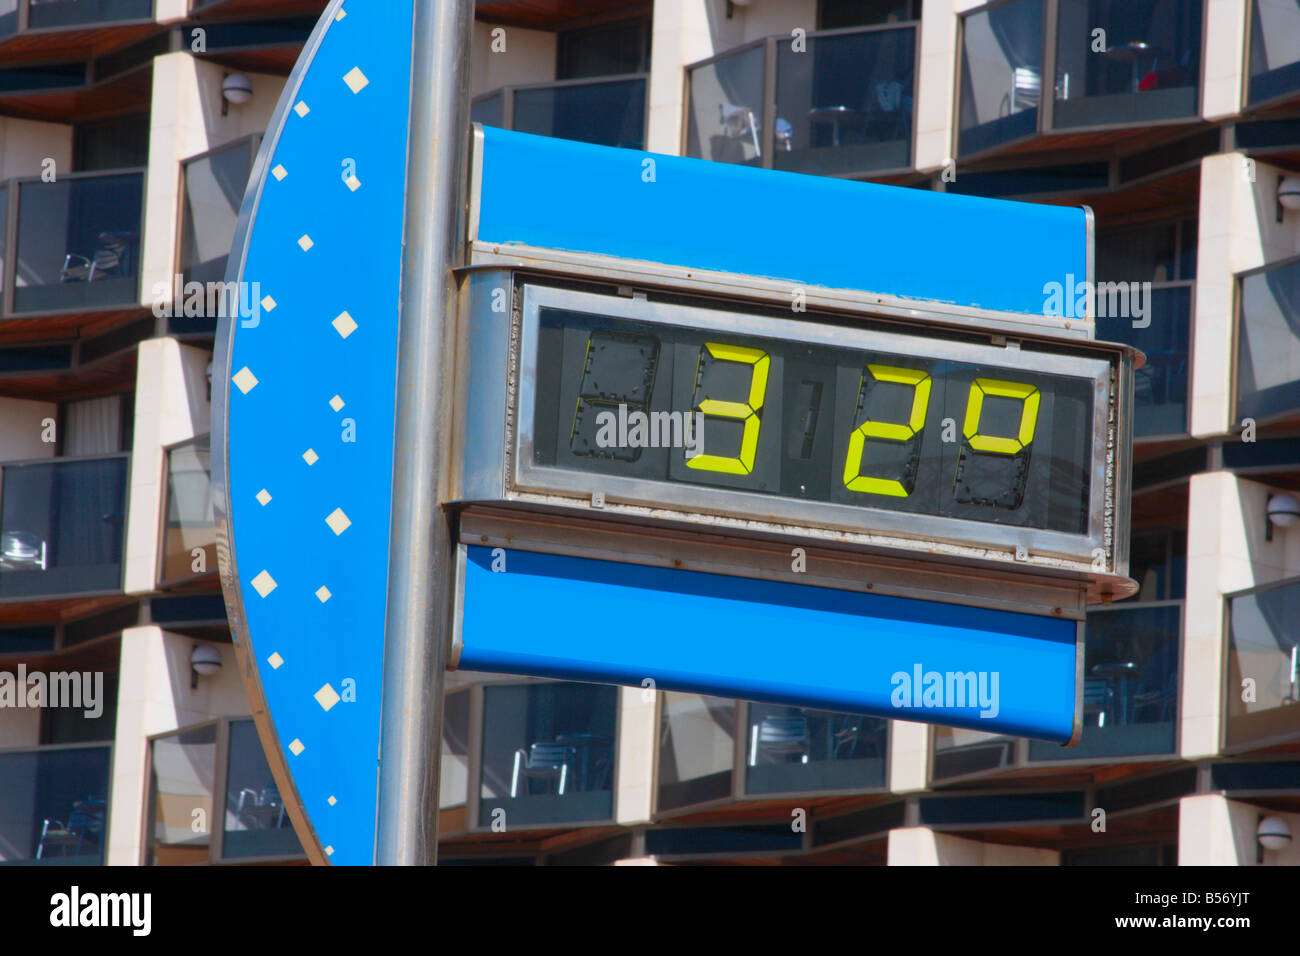 Outdoor digital thermometer Stock Photo - Alamy